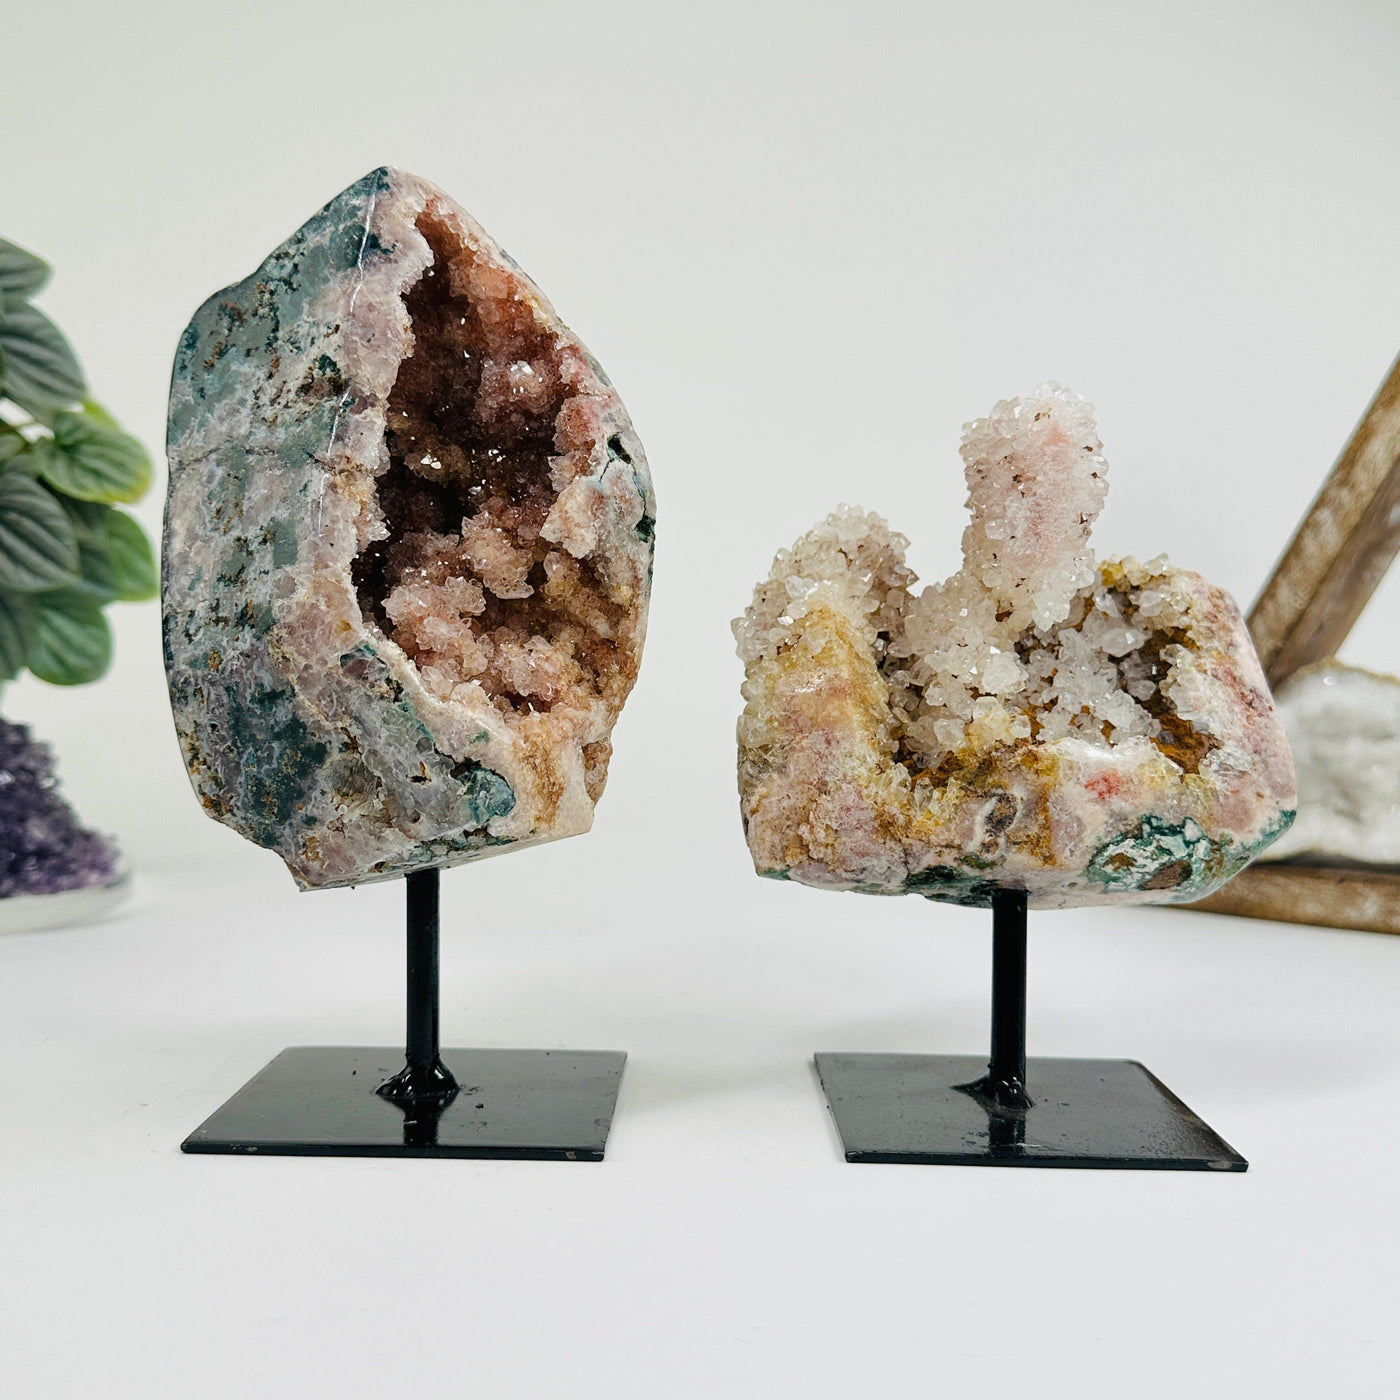 2 Pink amethyst on metal stands with decorations in the background